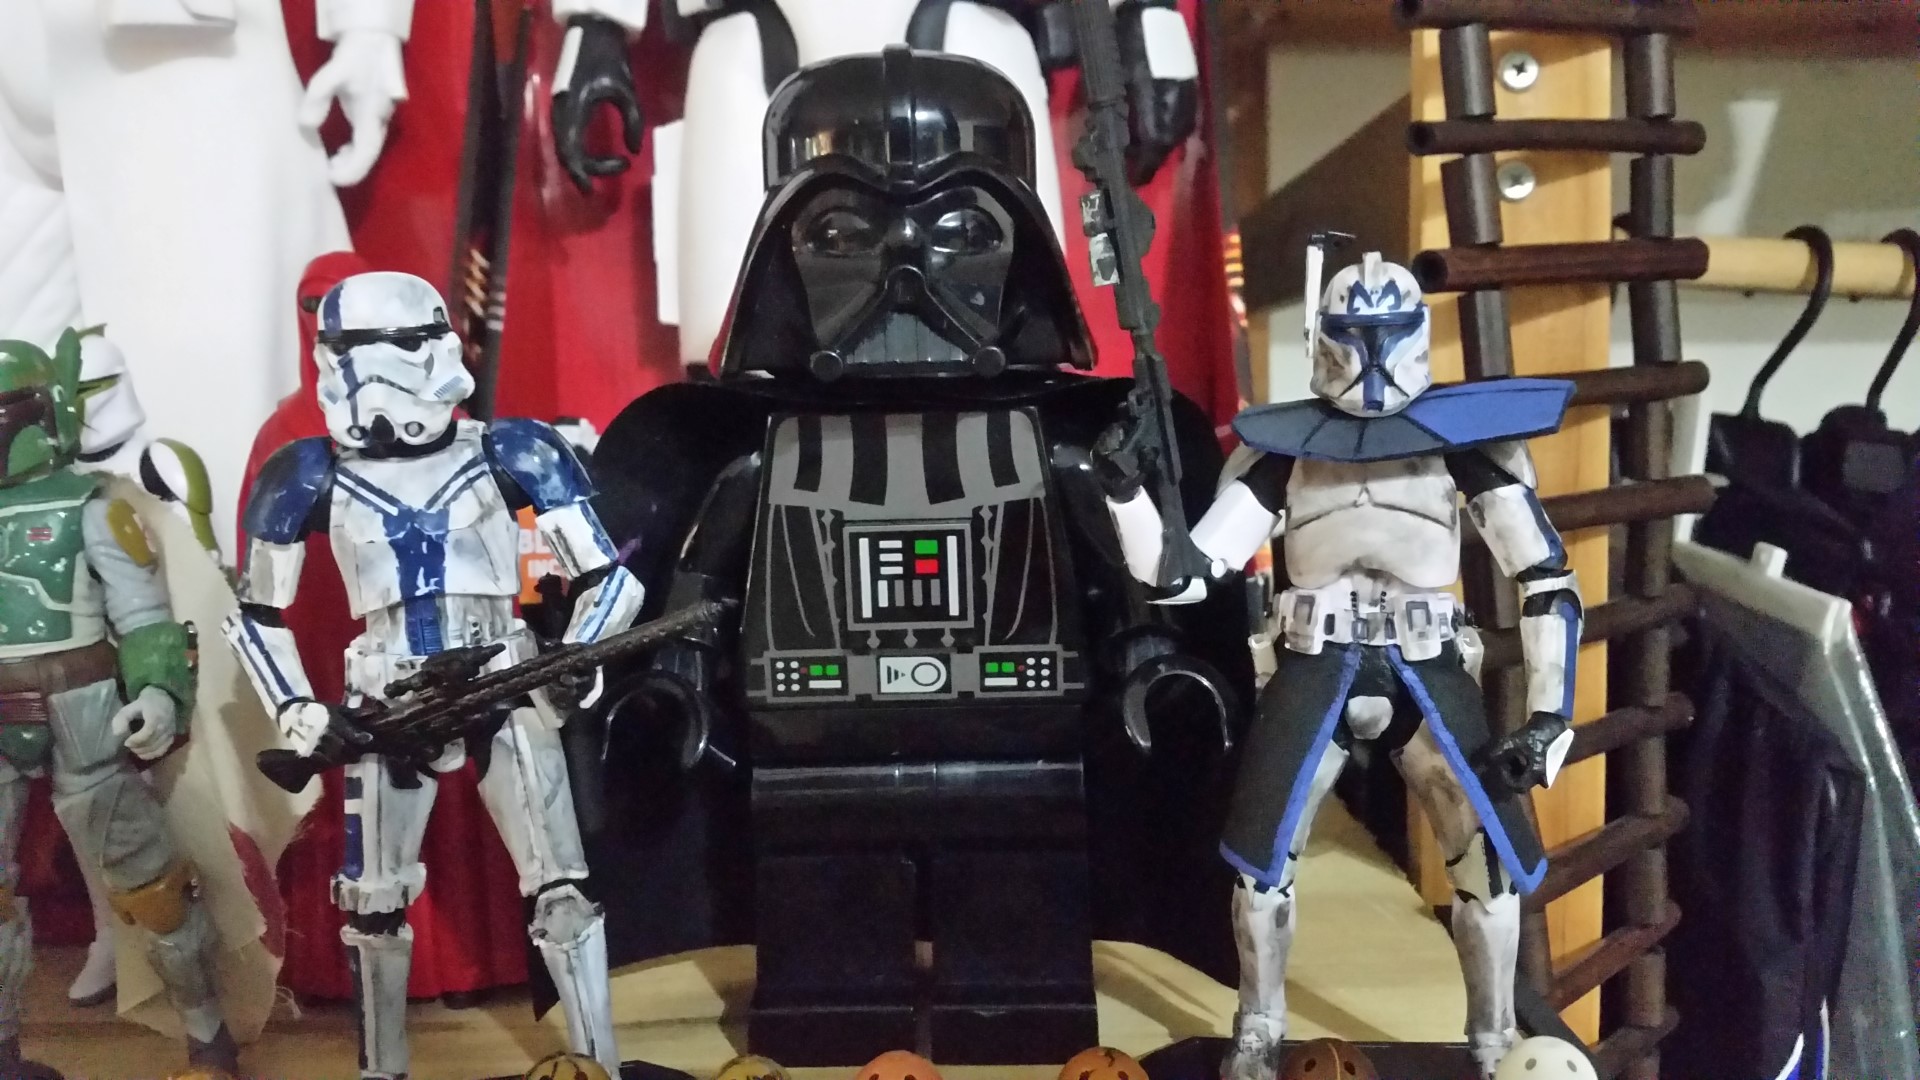 Size does matter. This is compared to the 6&quot; Black Series.